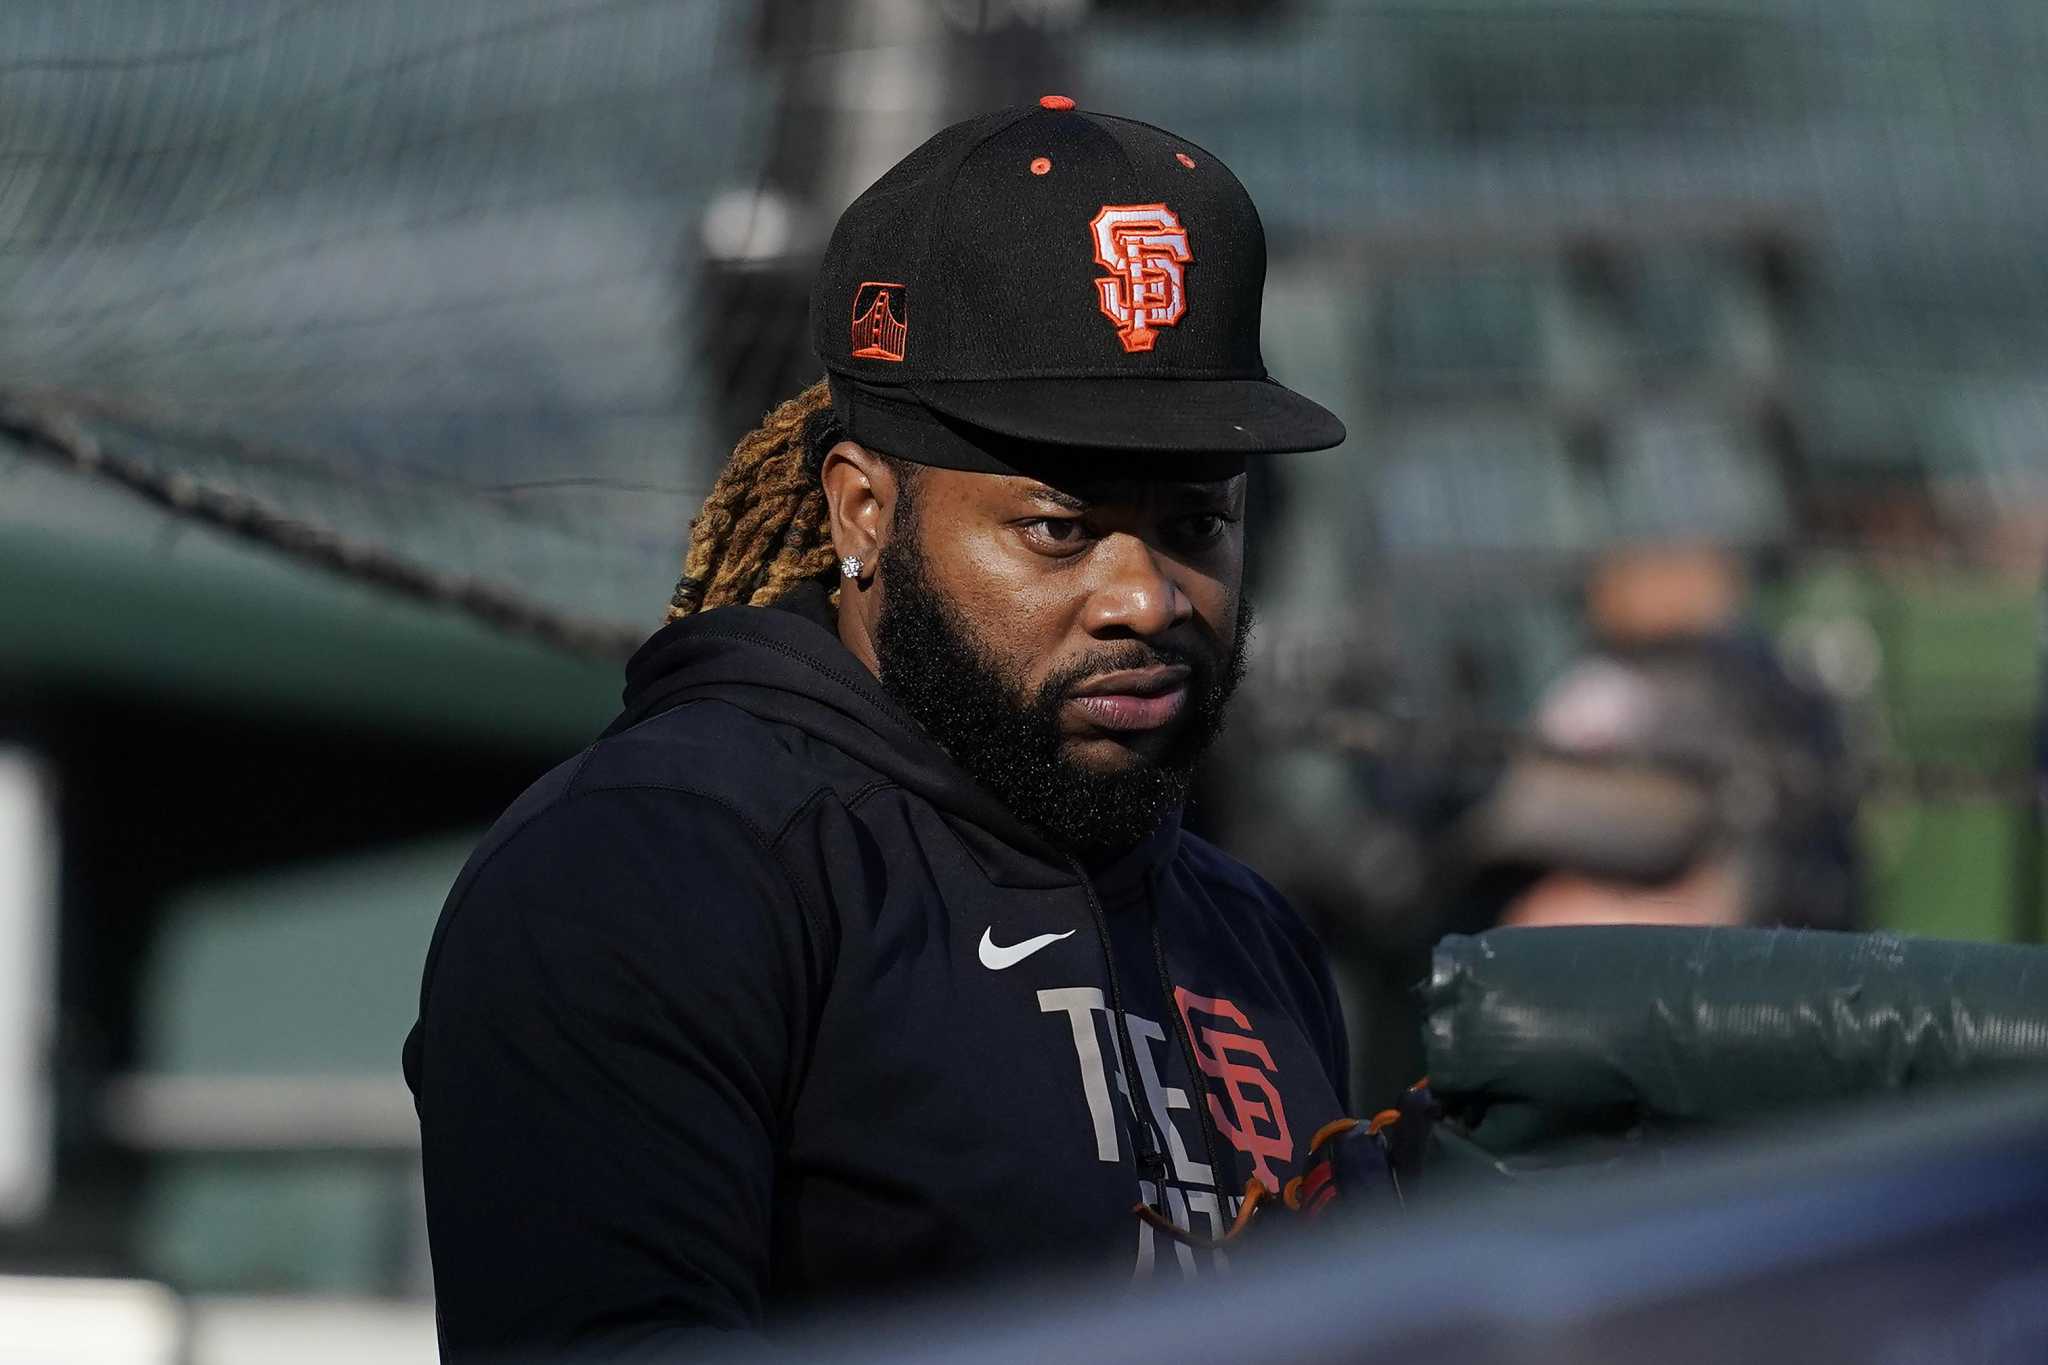 Johnny Cueto had a great game except for this laugh-worthy bunt